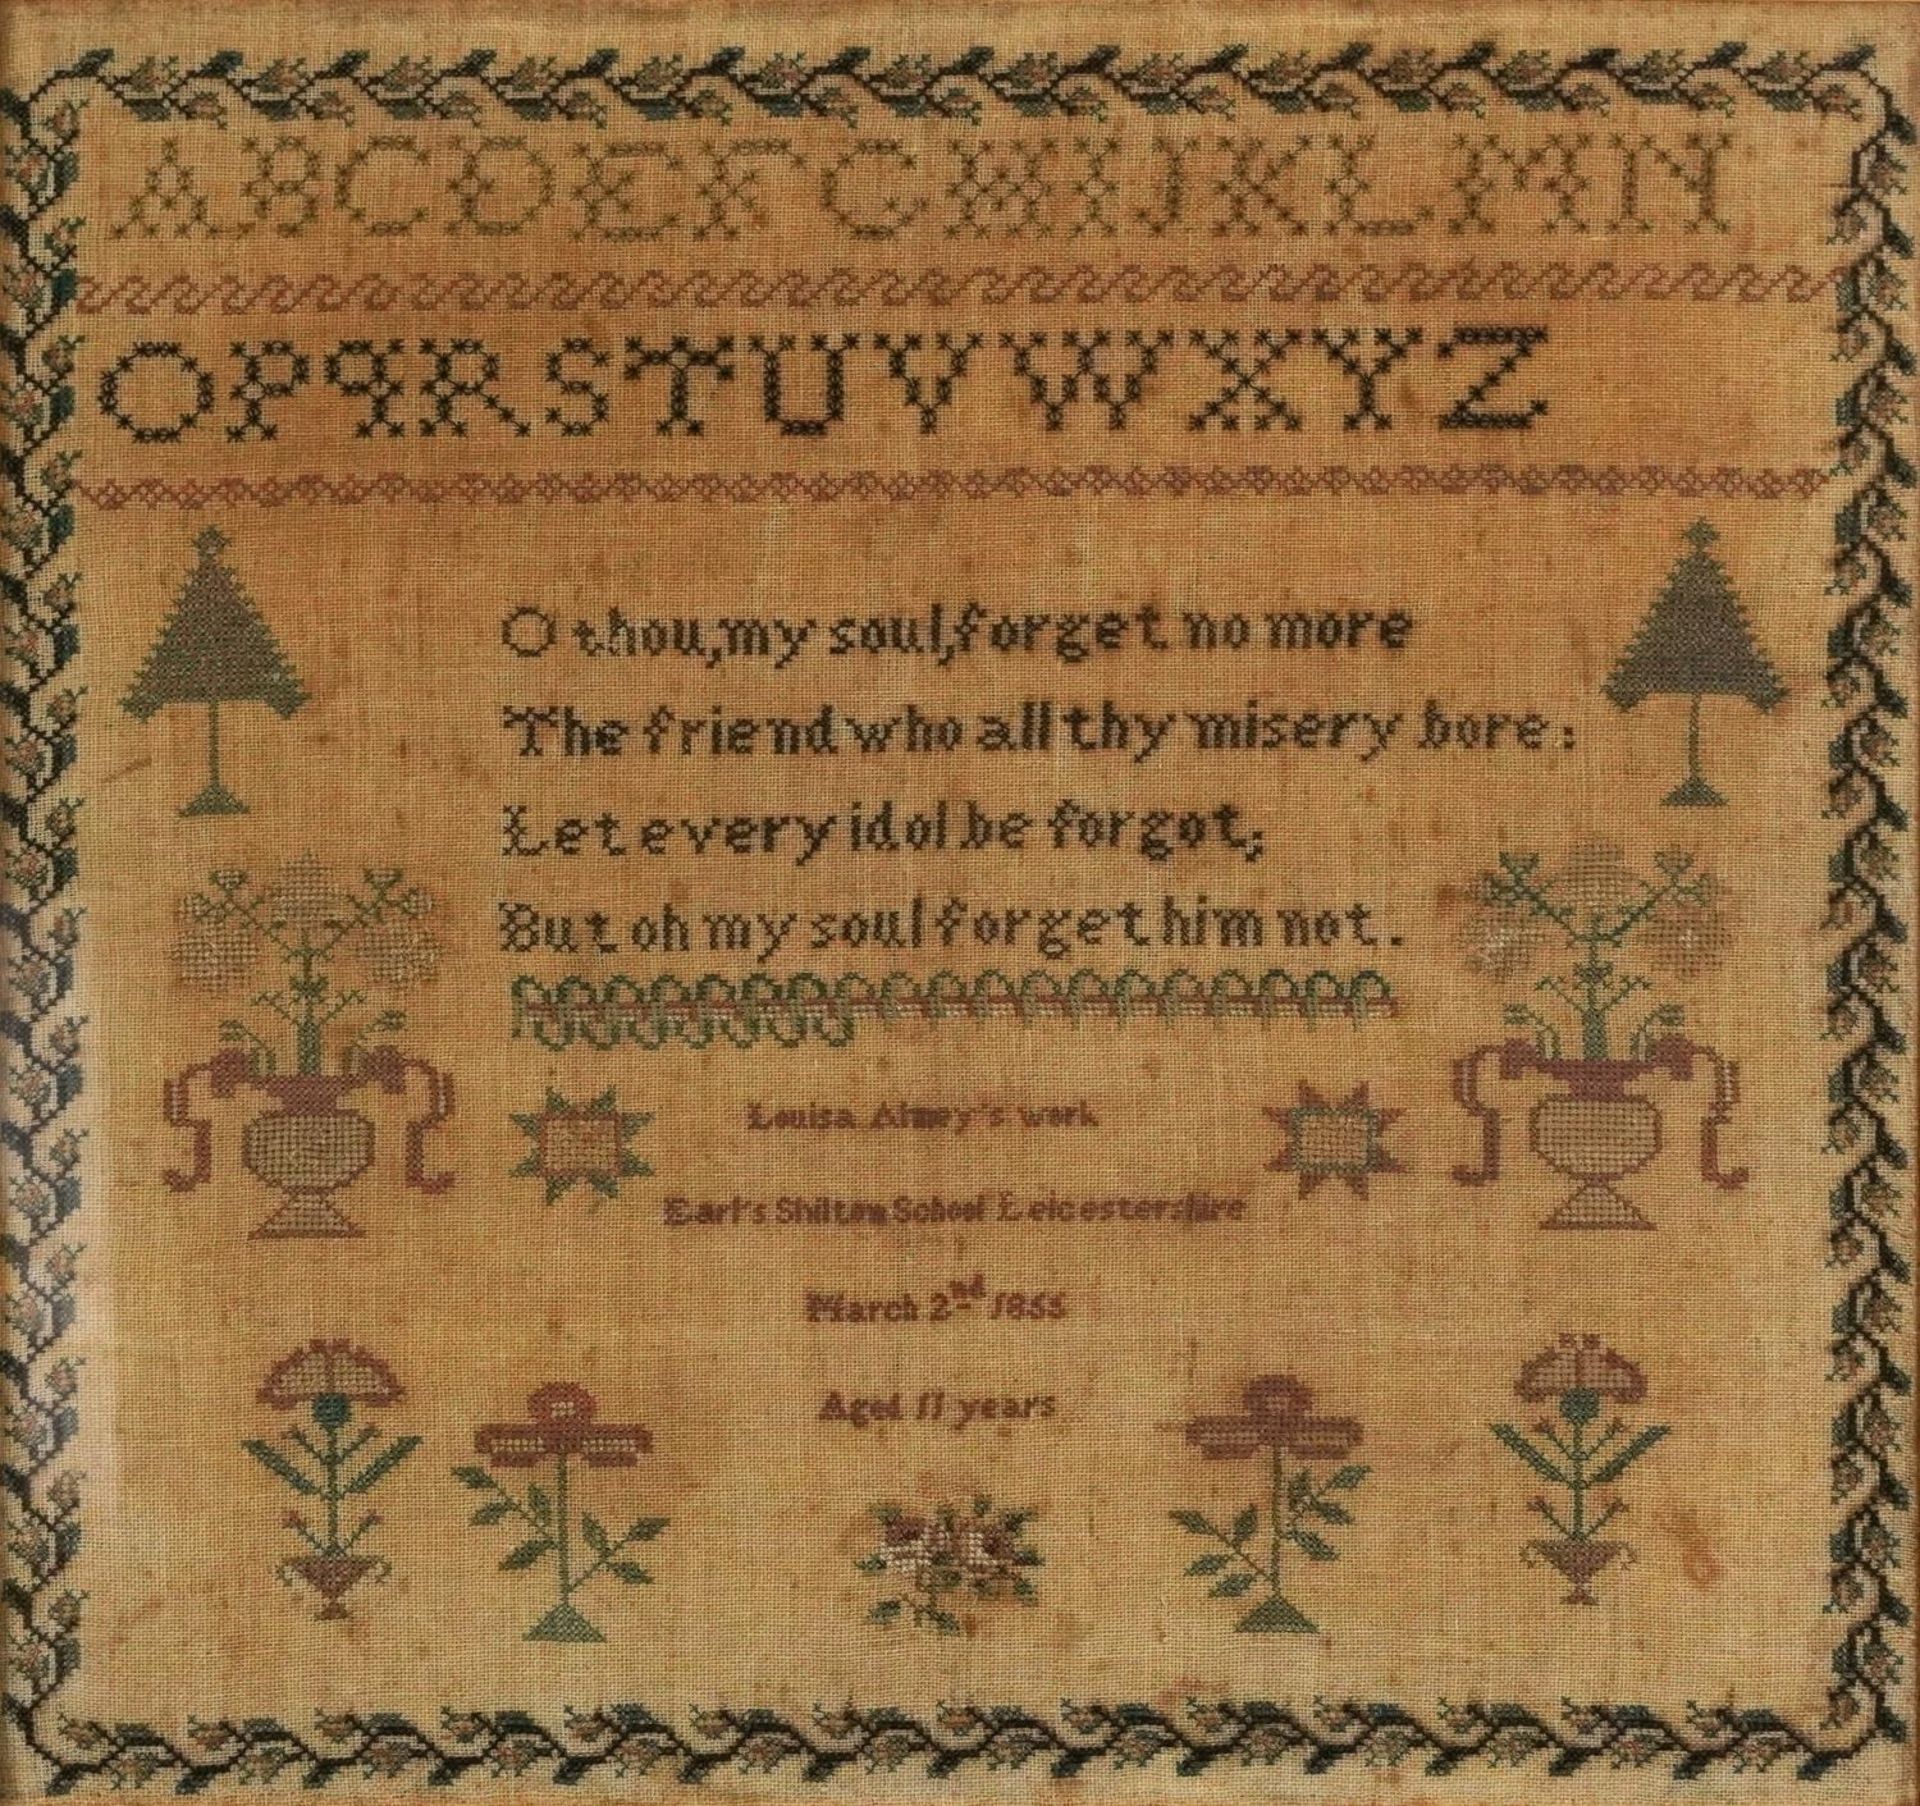 Mid 19th century needlework sampler with verse, alphabet and flowers by Louisa Almey aged 11,